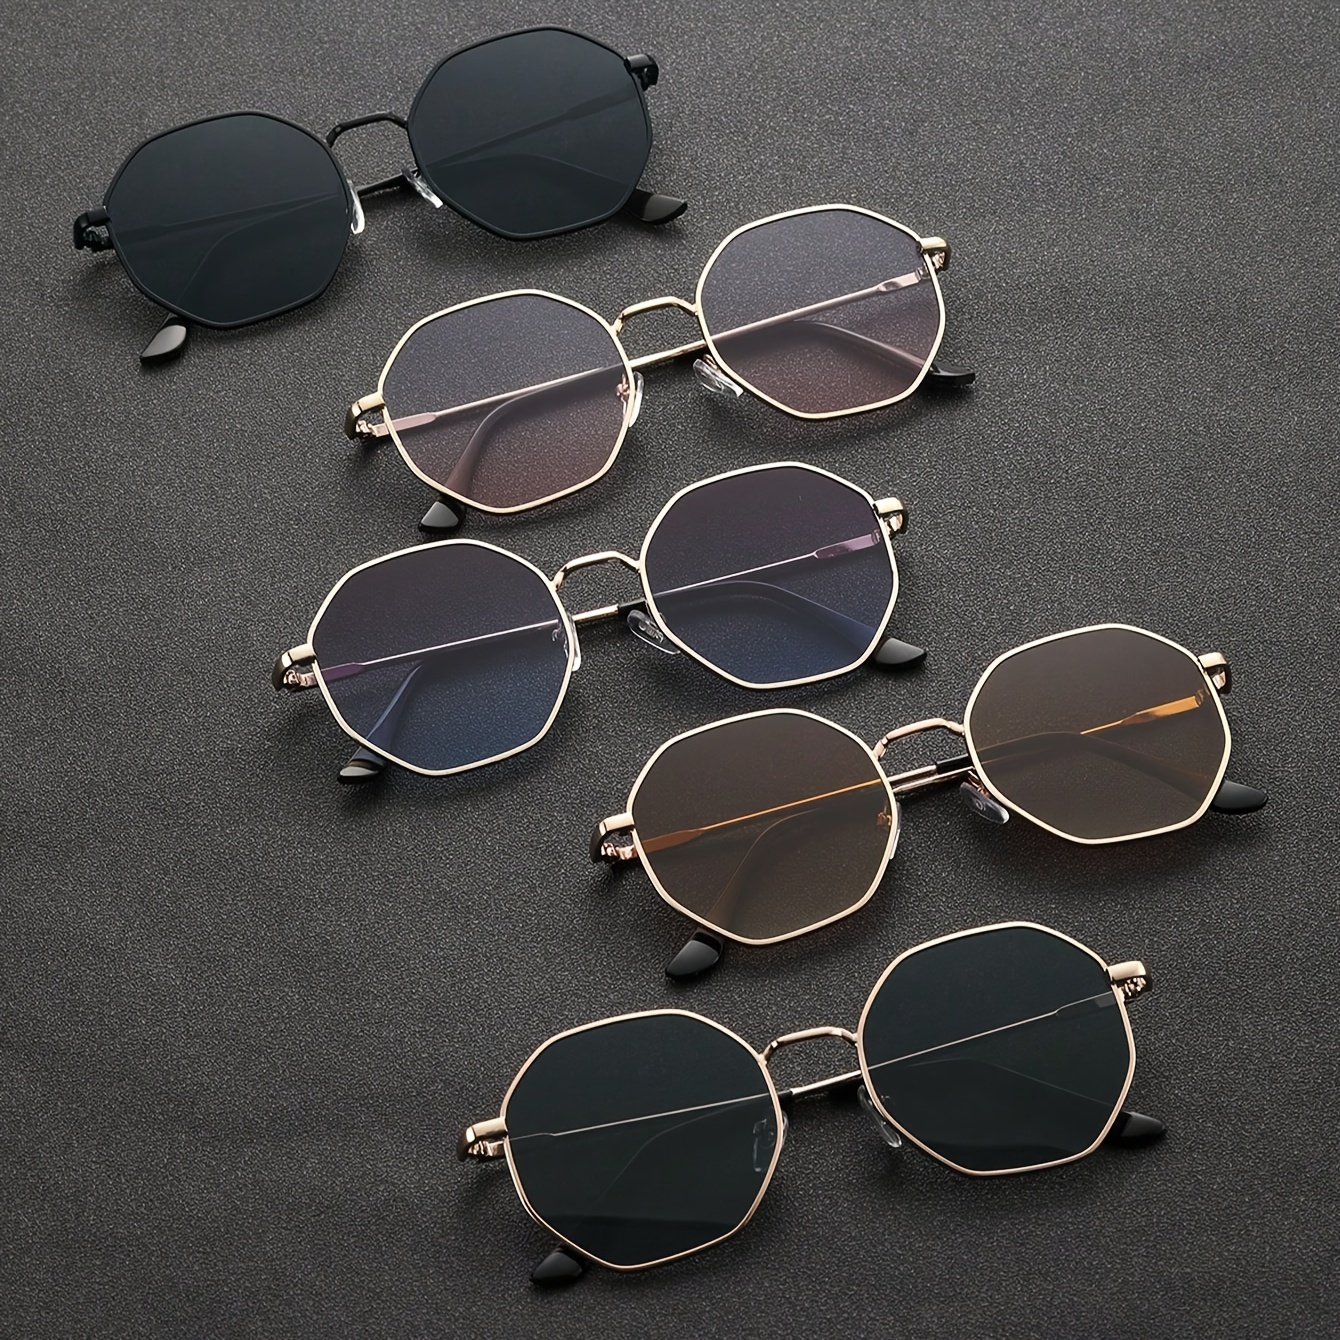 

5pcs Men's Vintage Geometric Frame Colorful Metallic Fashion Glasses - For Outdoor Daily Music Festival Accessories